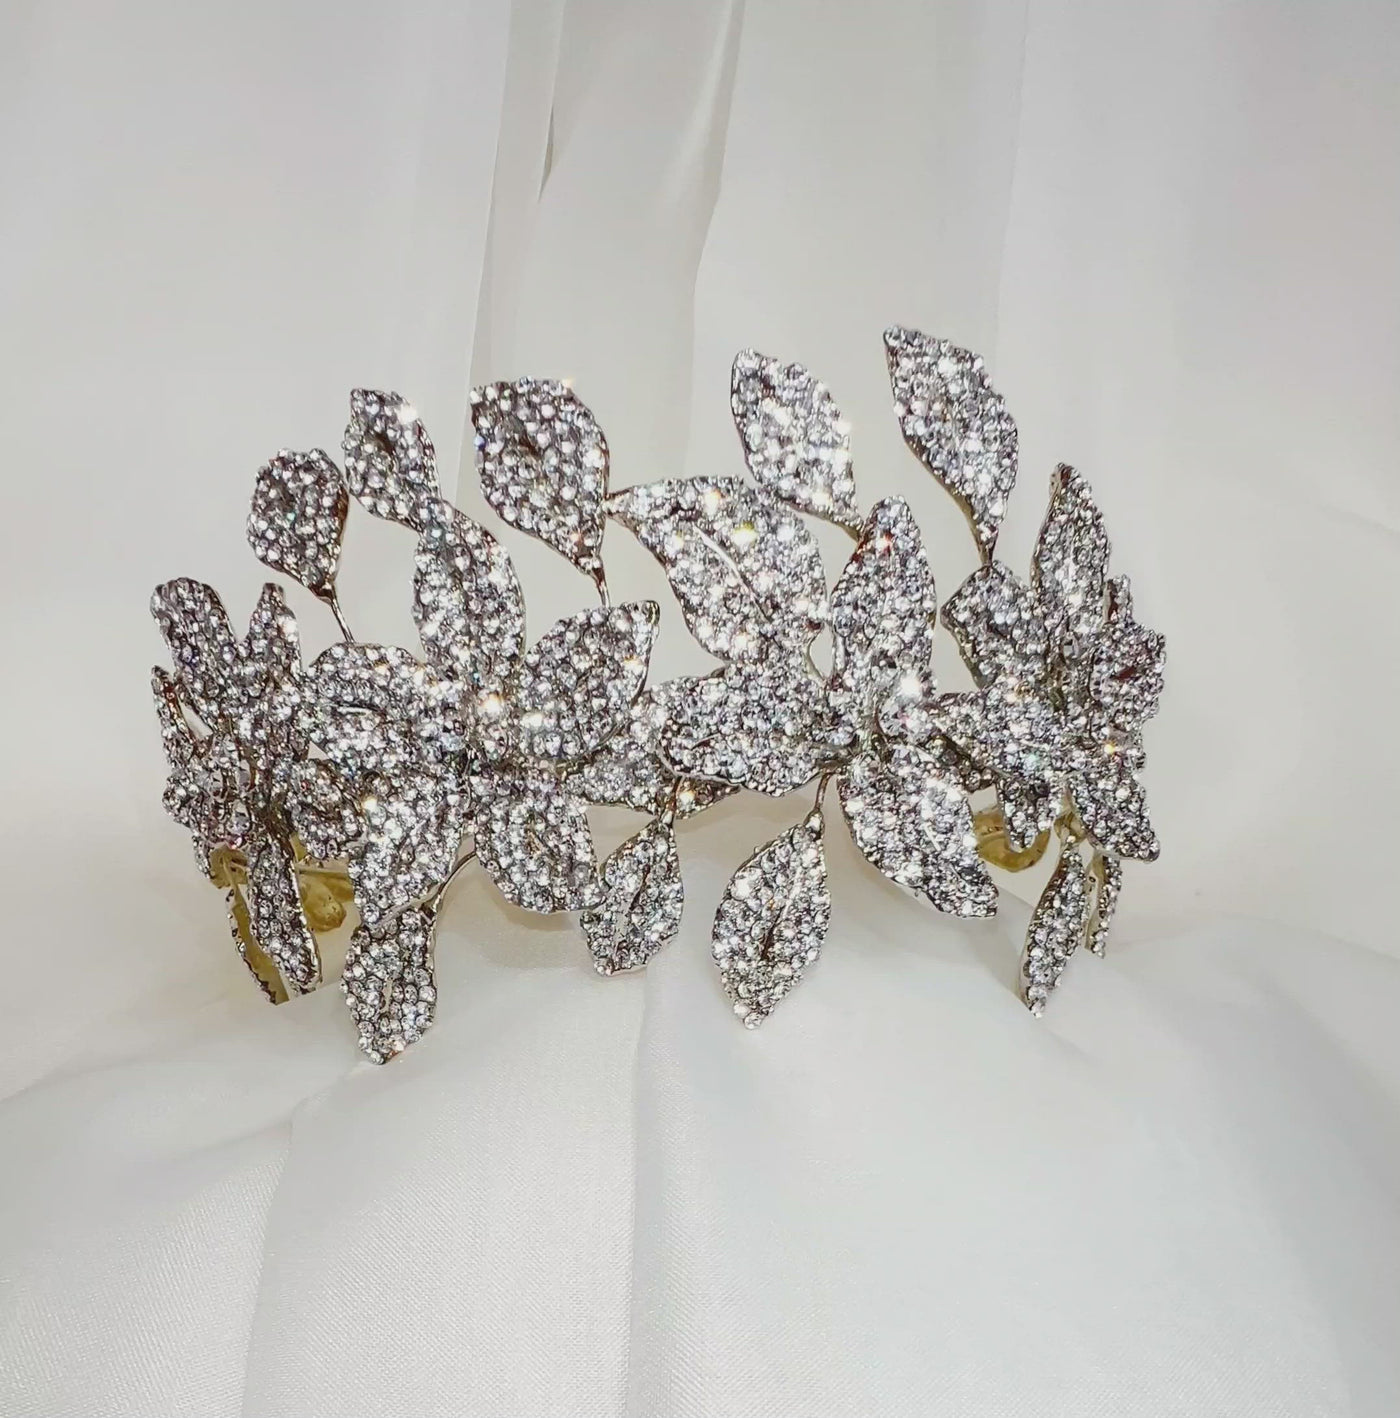 silver bridal headband with crystalized flowers and sparkling leaves